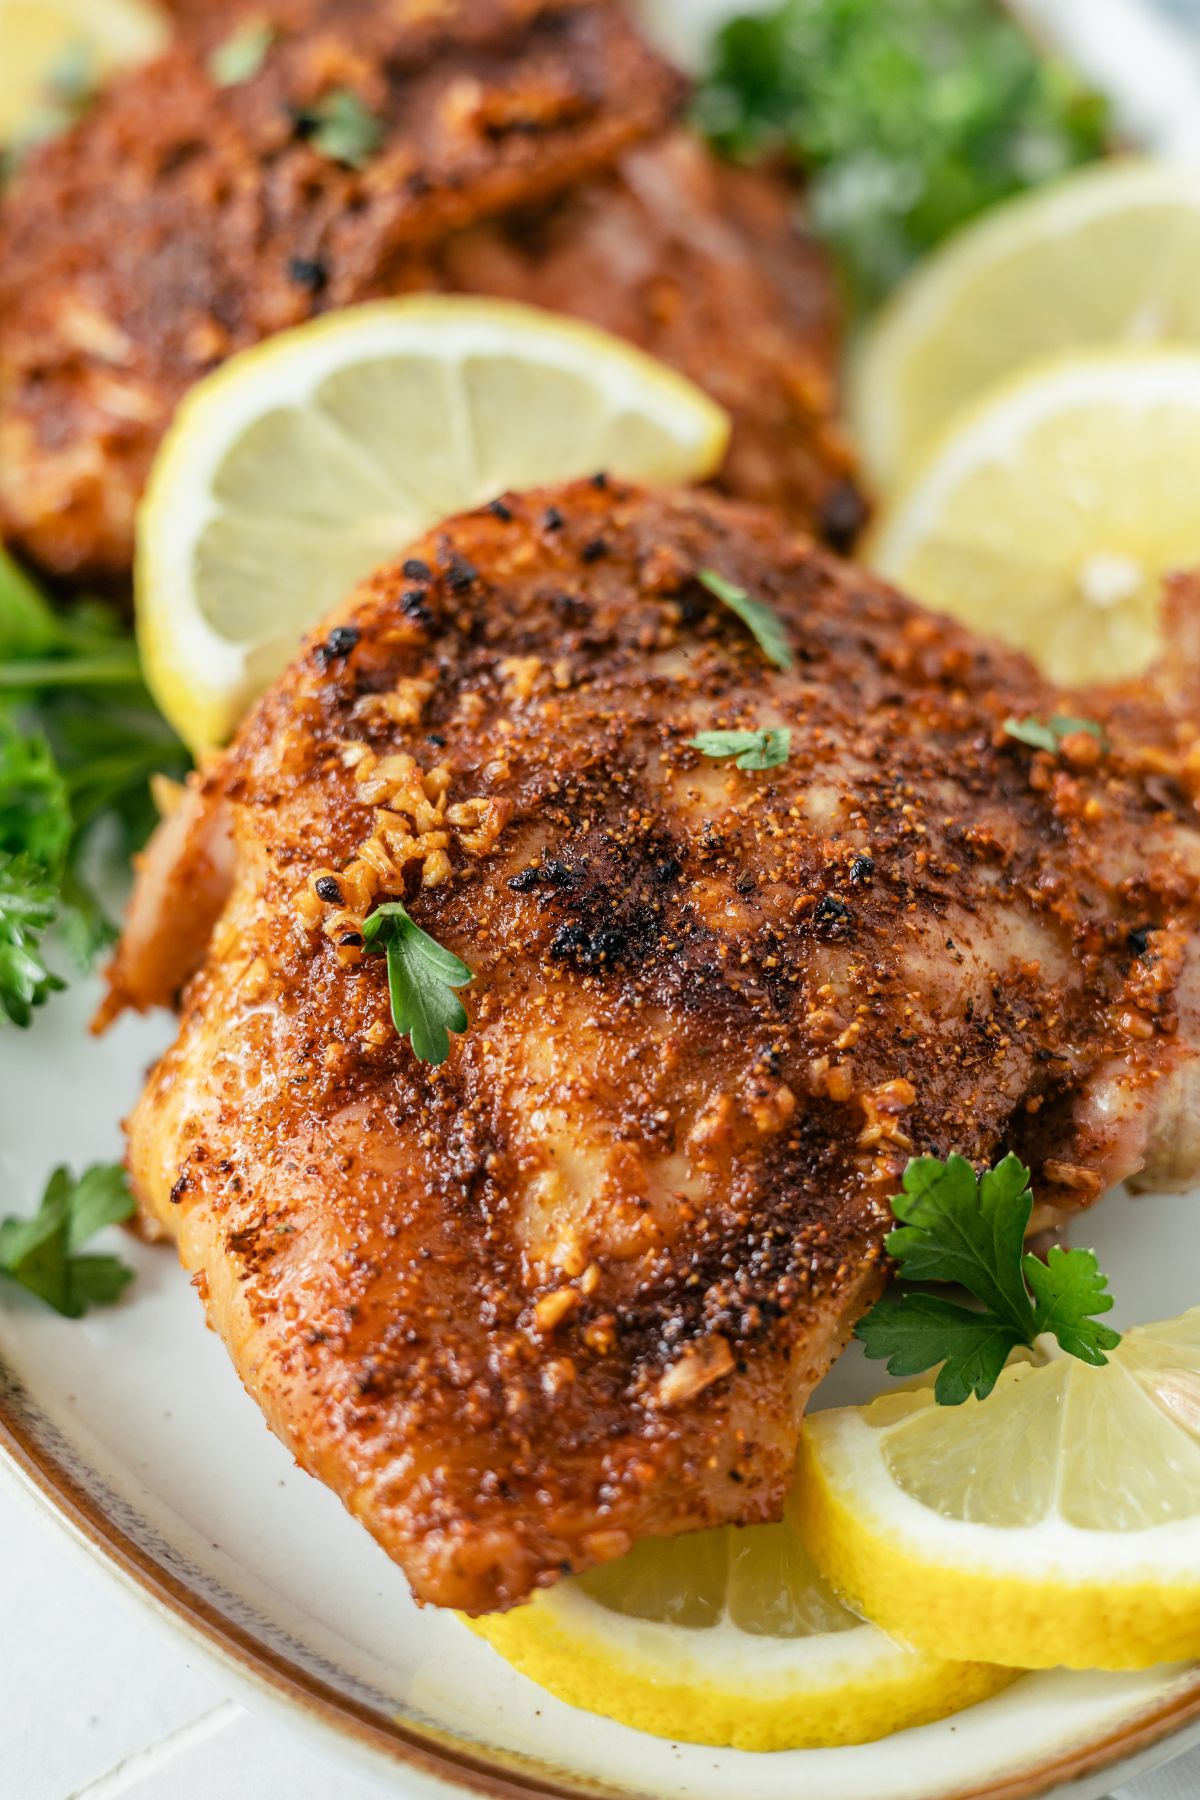 juicy and tasty Baked Cajun Chicken on a plate with slices of lemon